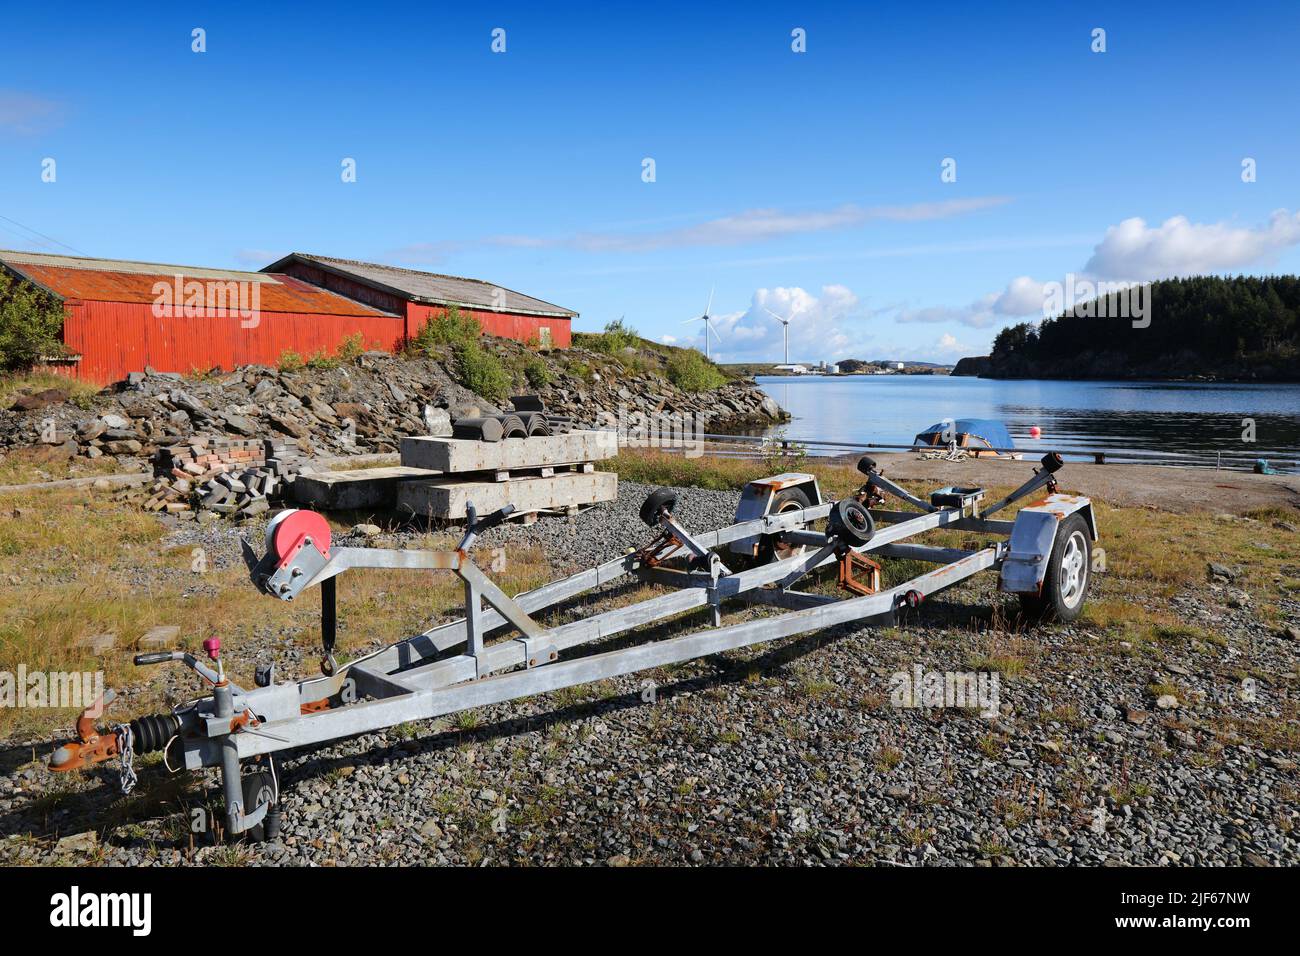 Norway coast in summer. Boat trailer in fishing harbor morning at Karmoy island. Stock Photo